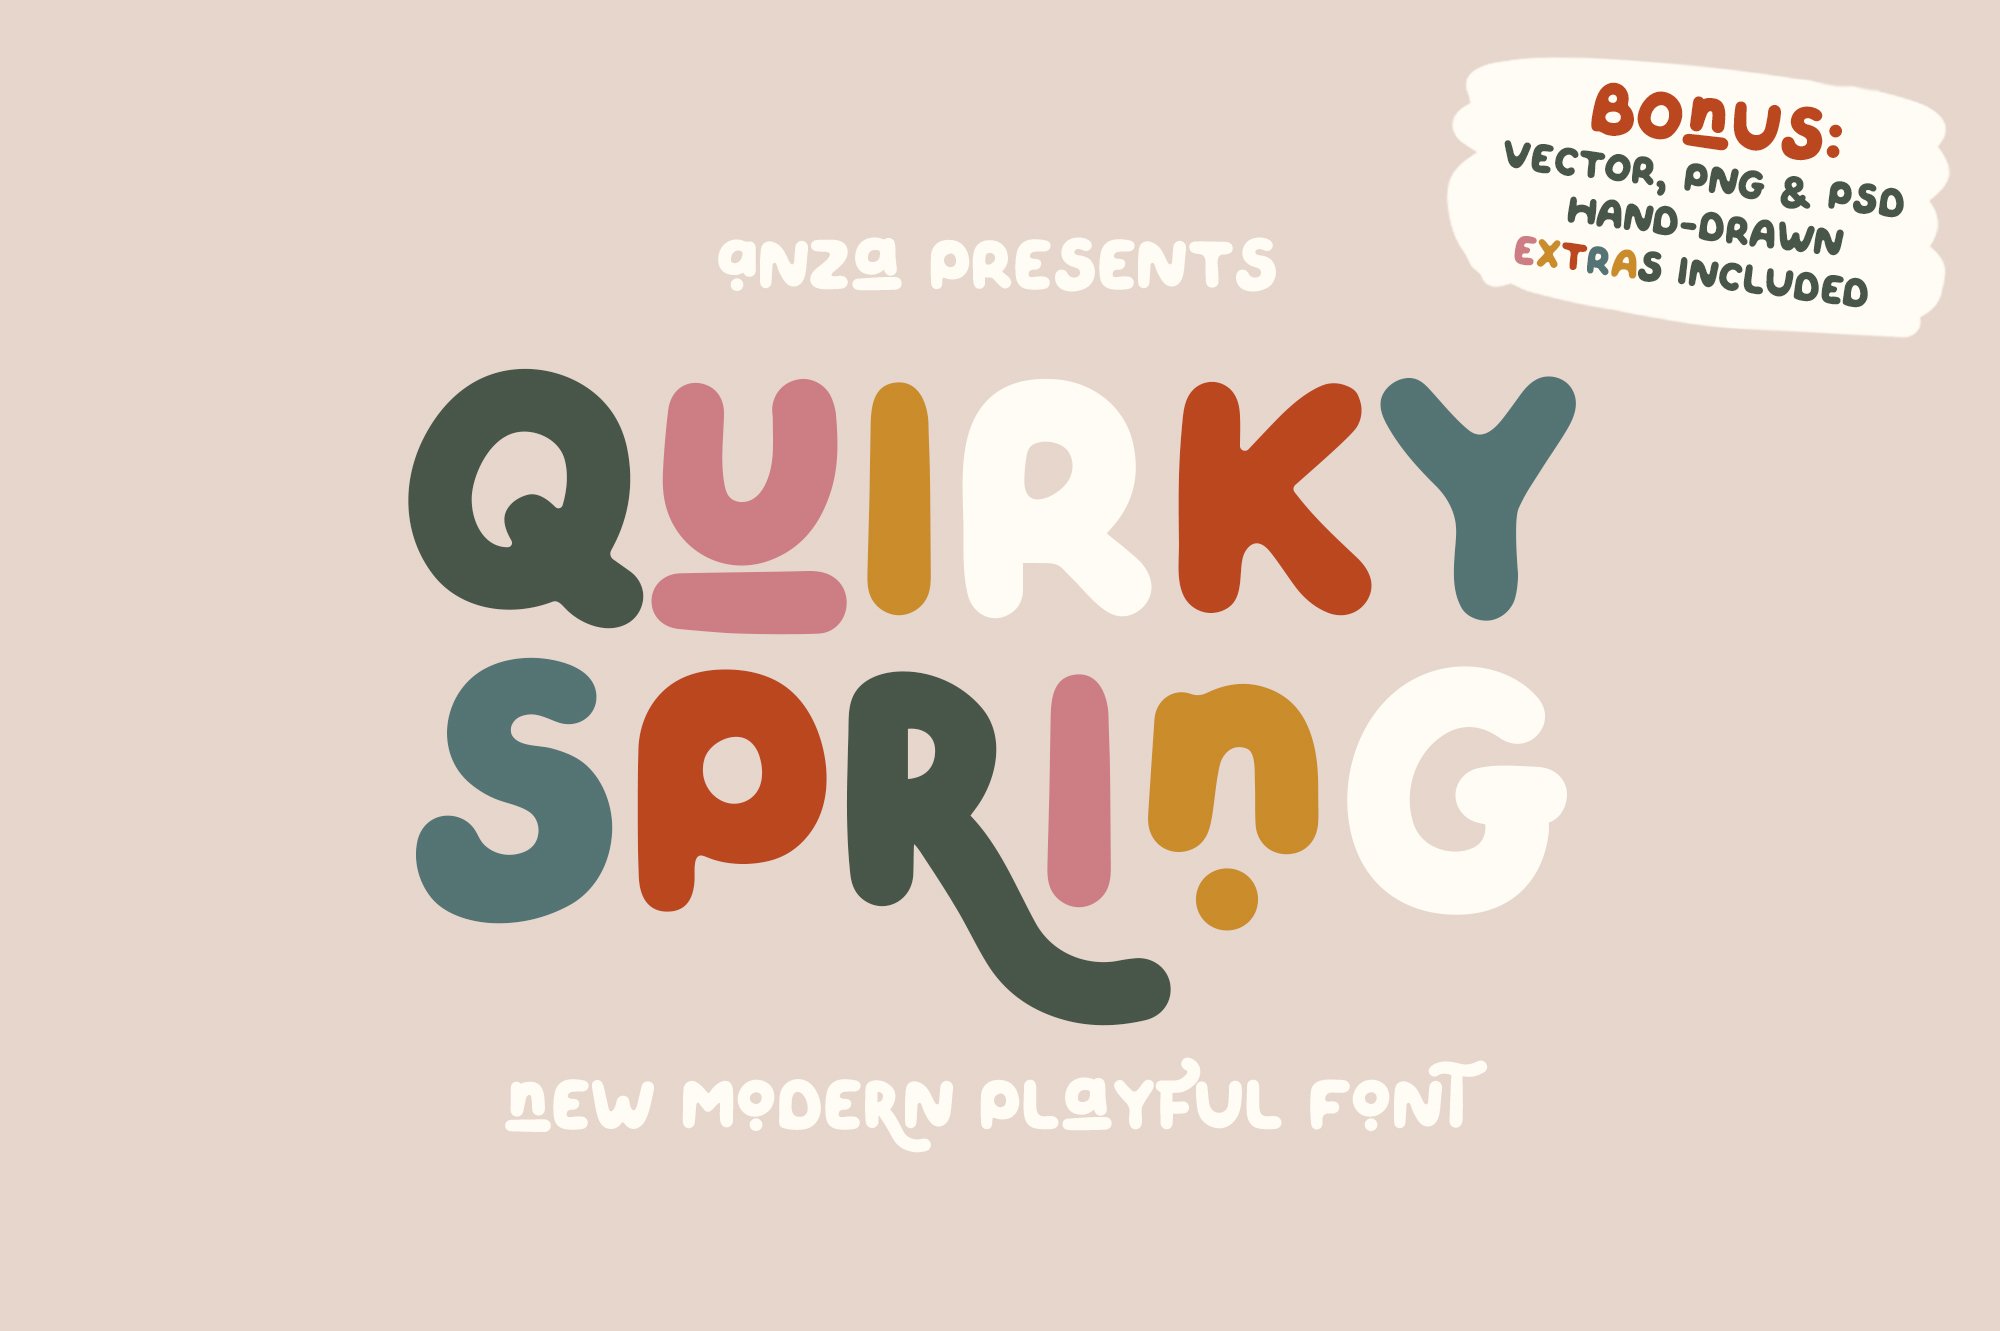 QUIRKY SPRING Playful Font Family cover image.